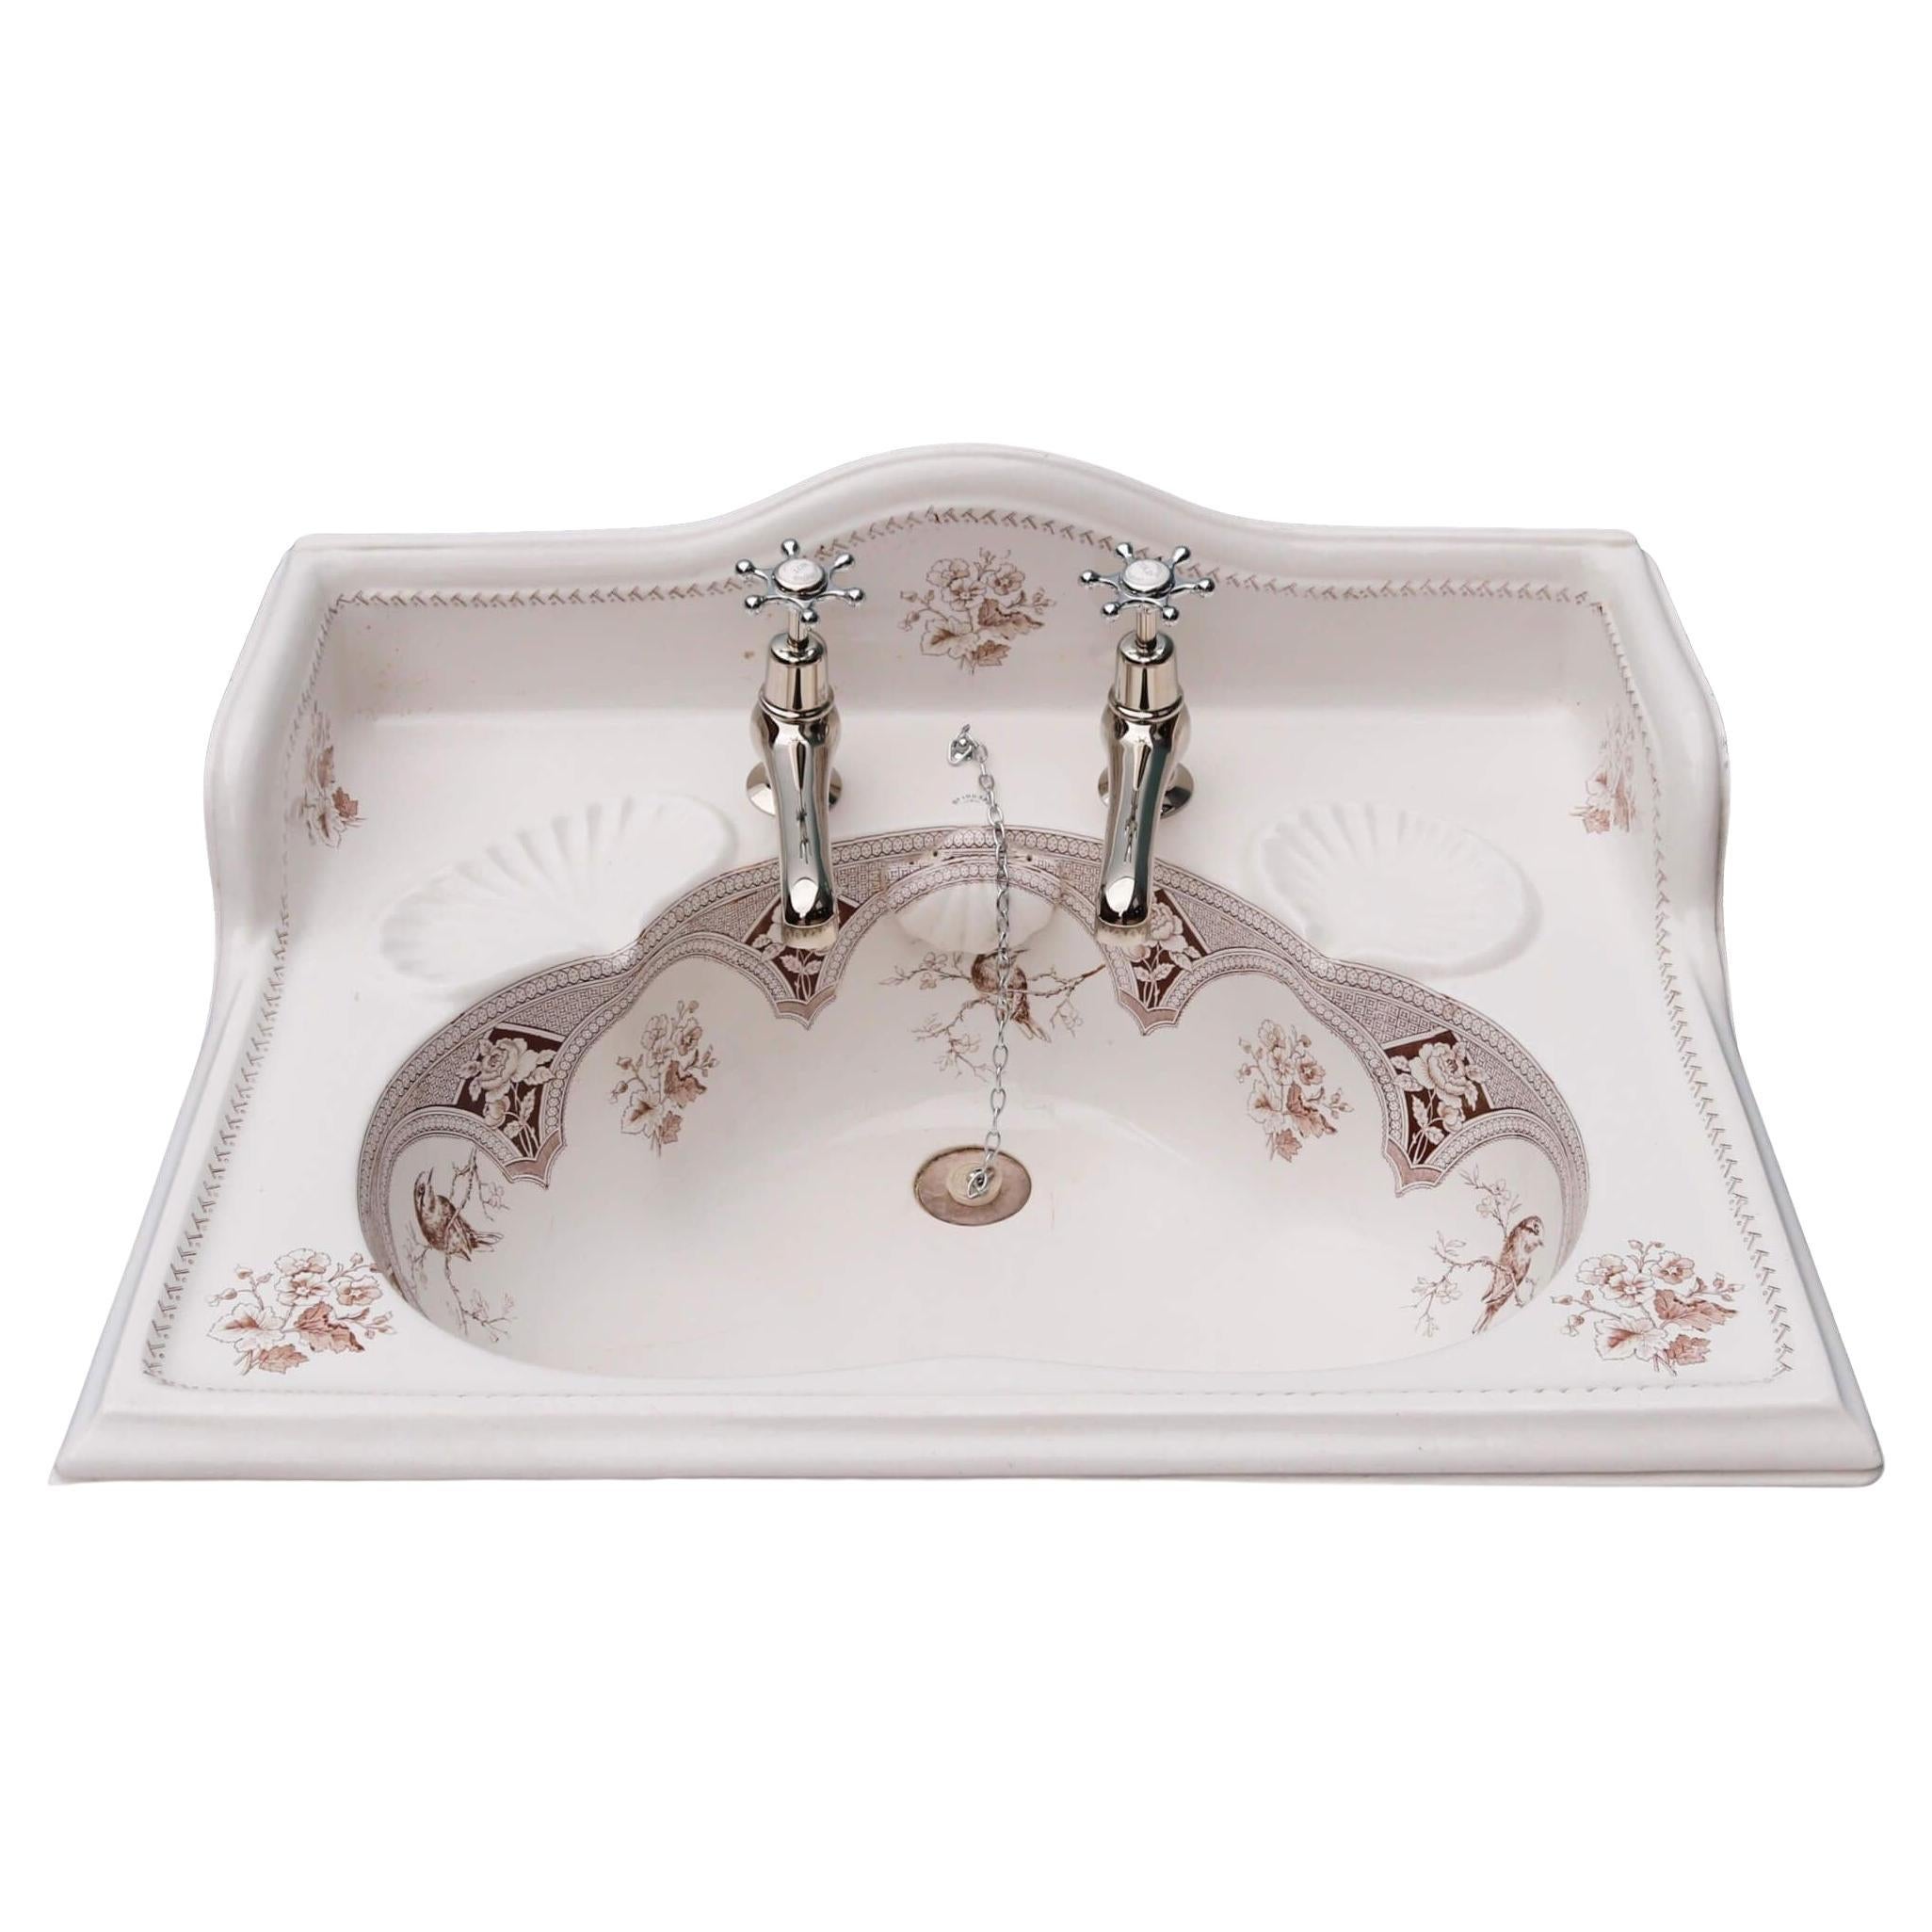 Victorian Bathroom Washbasin with Sepia Transfer Print For Sale